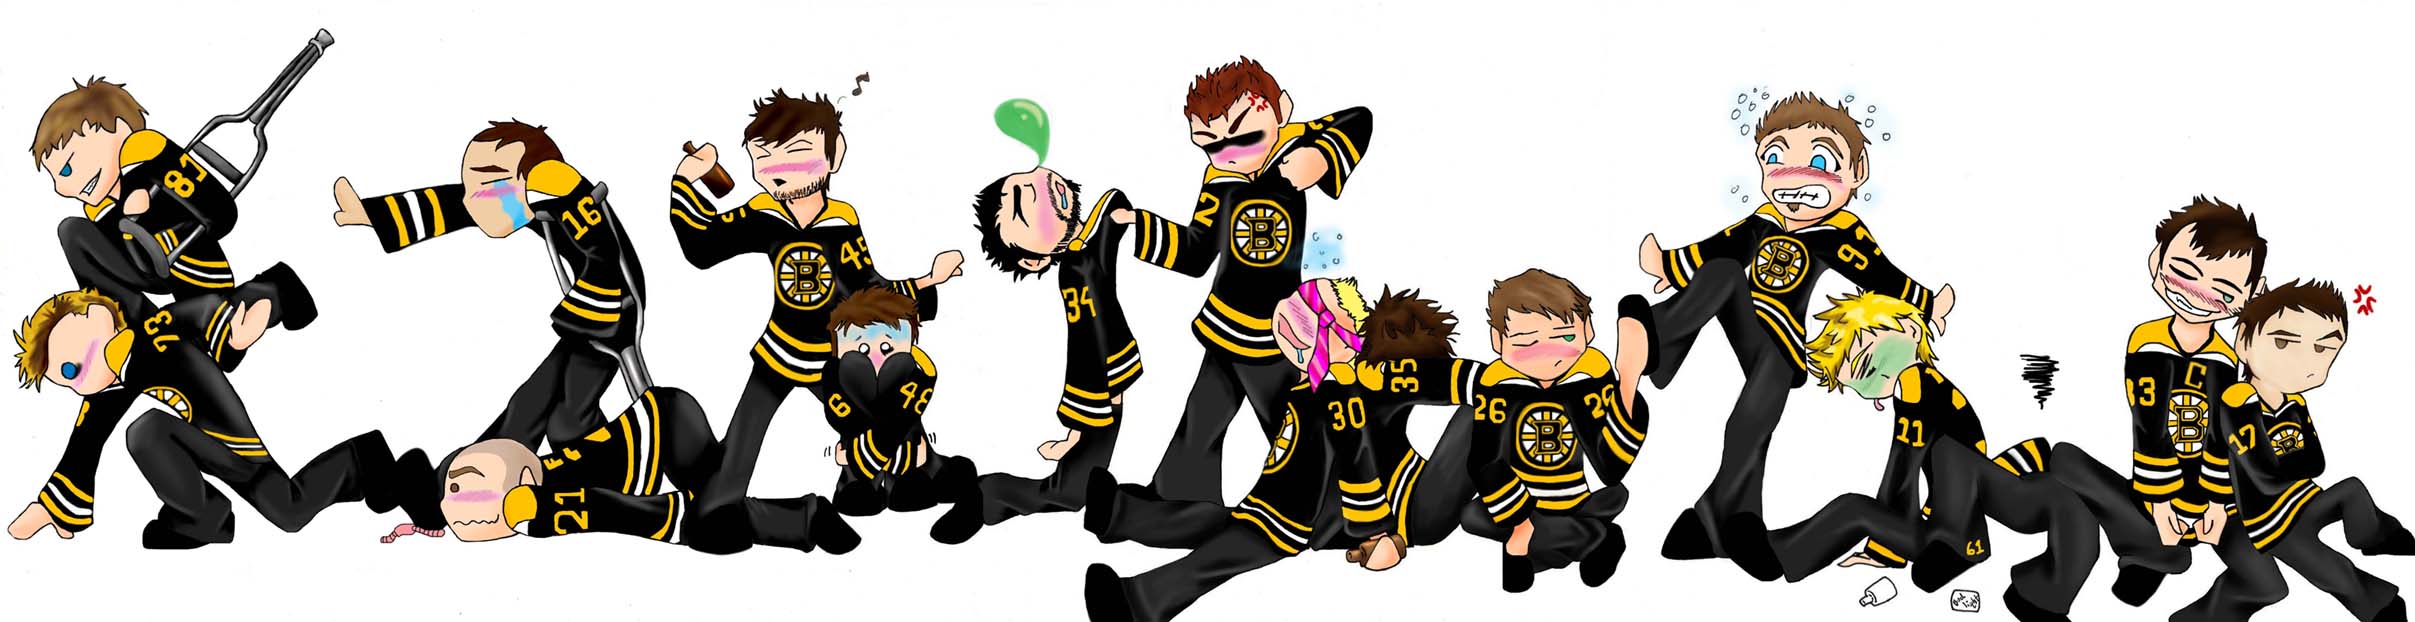 the 08-09 boston Bruins party by GoetheFaust